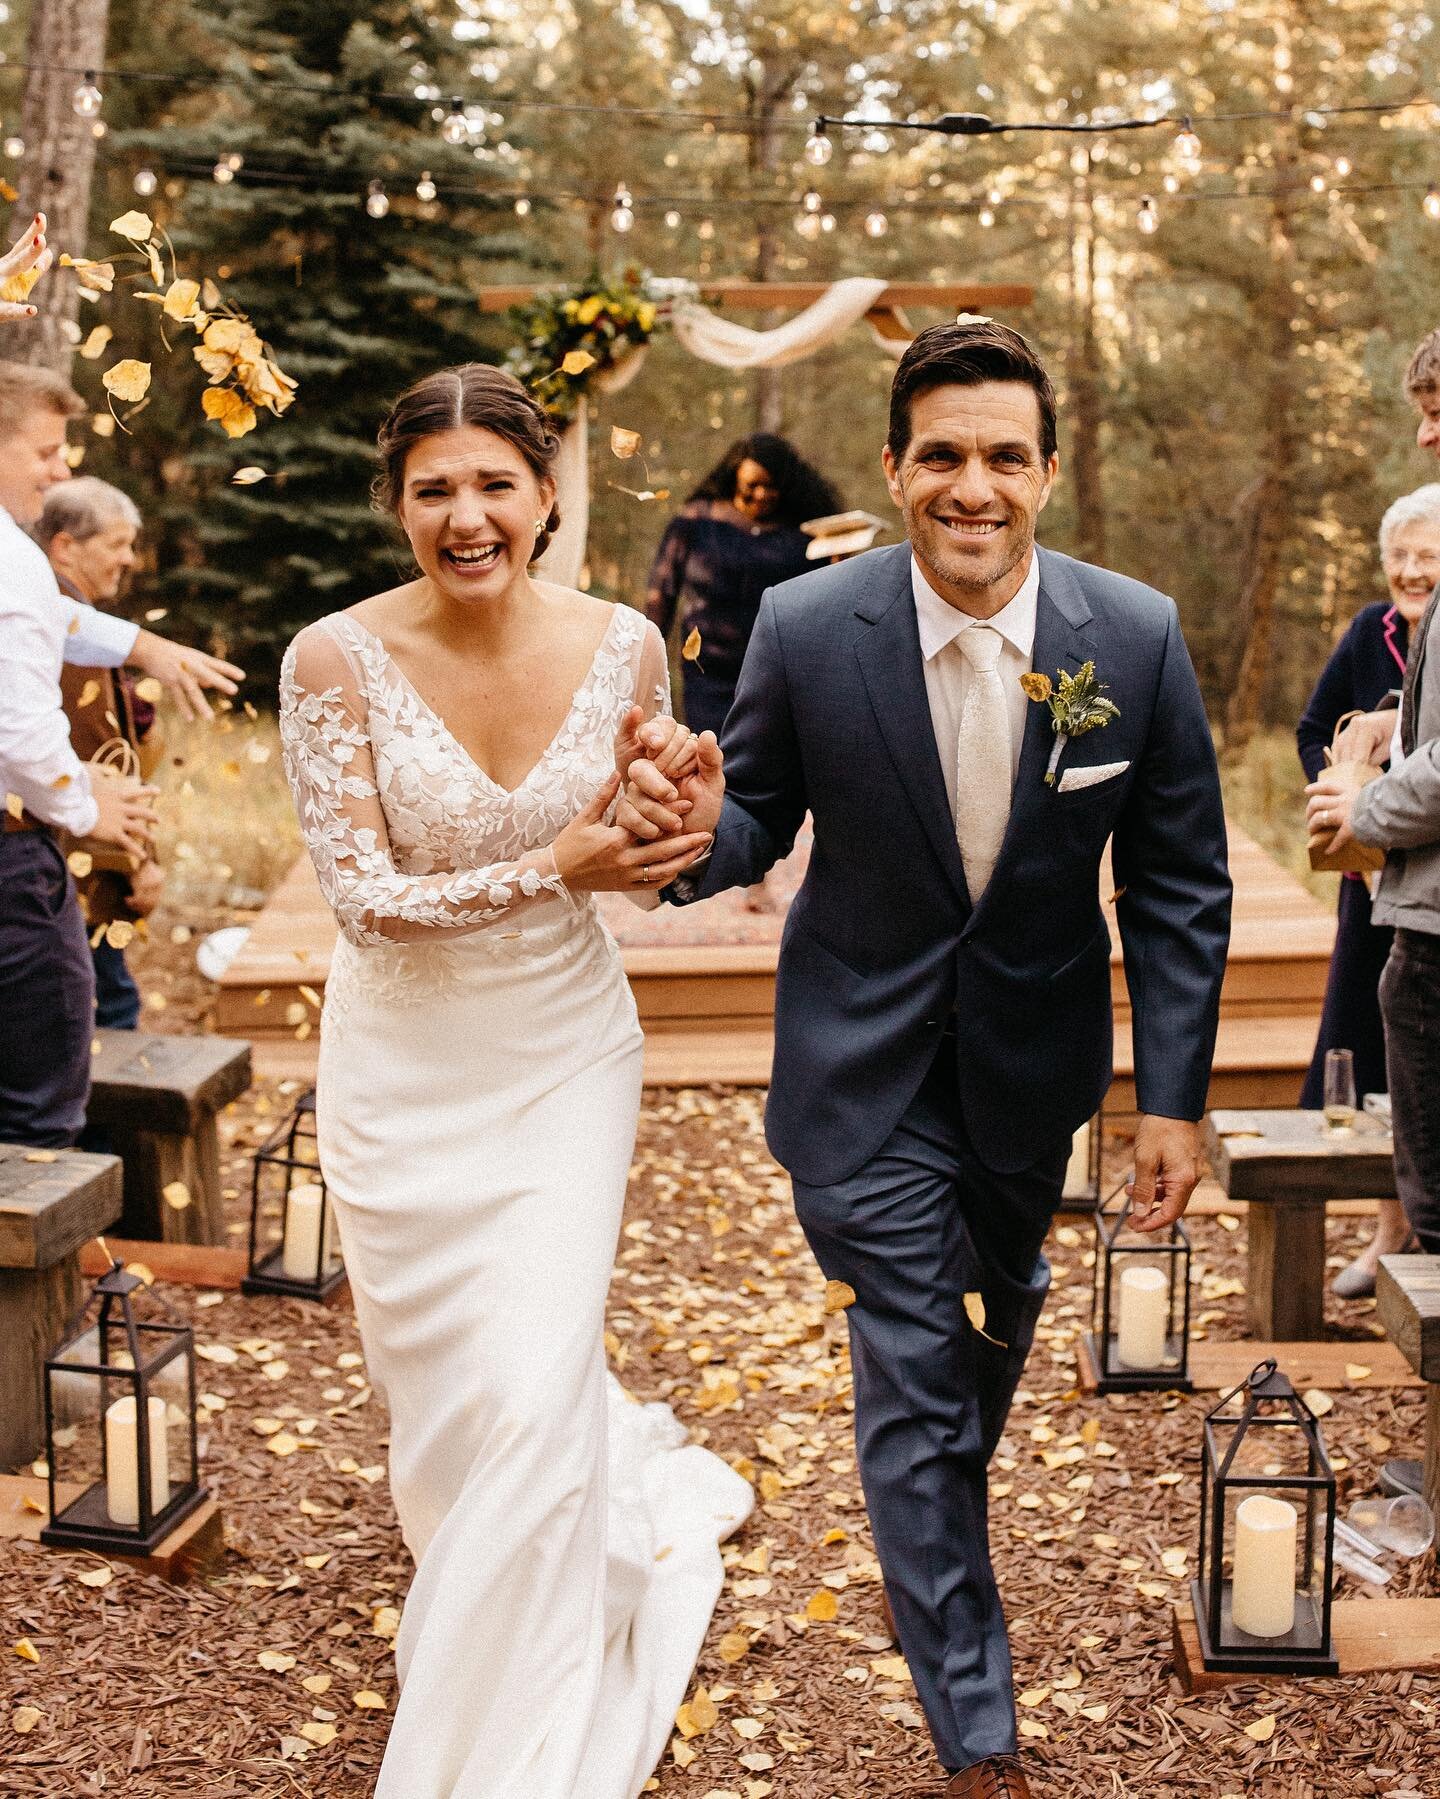 ✨That just married feeling ✨

Laura and David had the most beautiful, intimate, fall wedding surrounded by their families and closest friends!

Photographer | @lindseyboluyt 
Venue | @junipermountainhouse 
Planner | @mcarthurweddingsandevents
Caterin